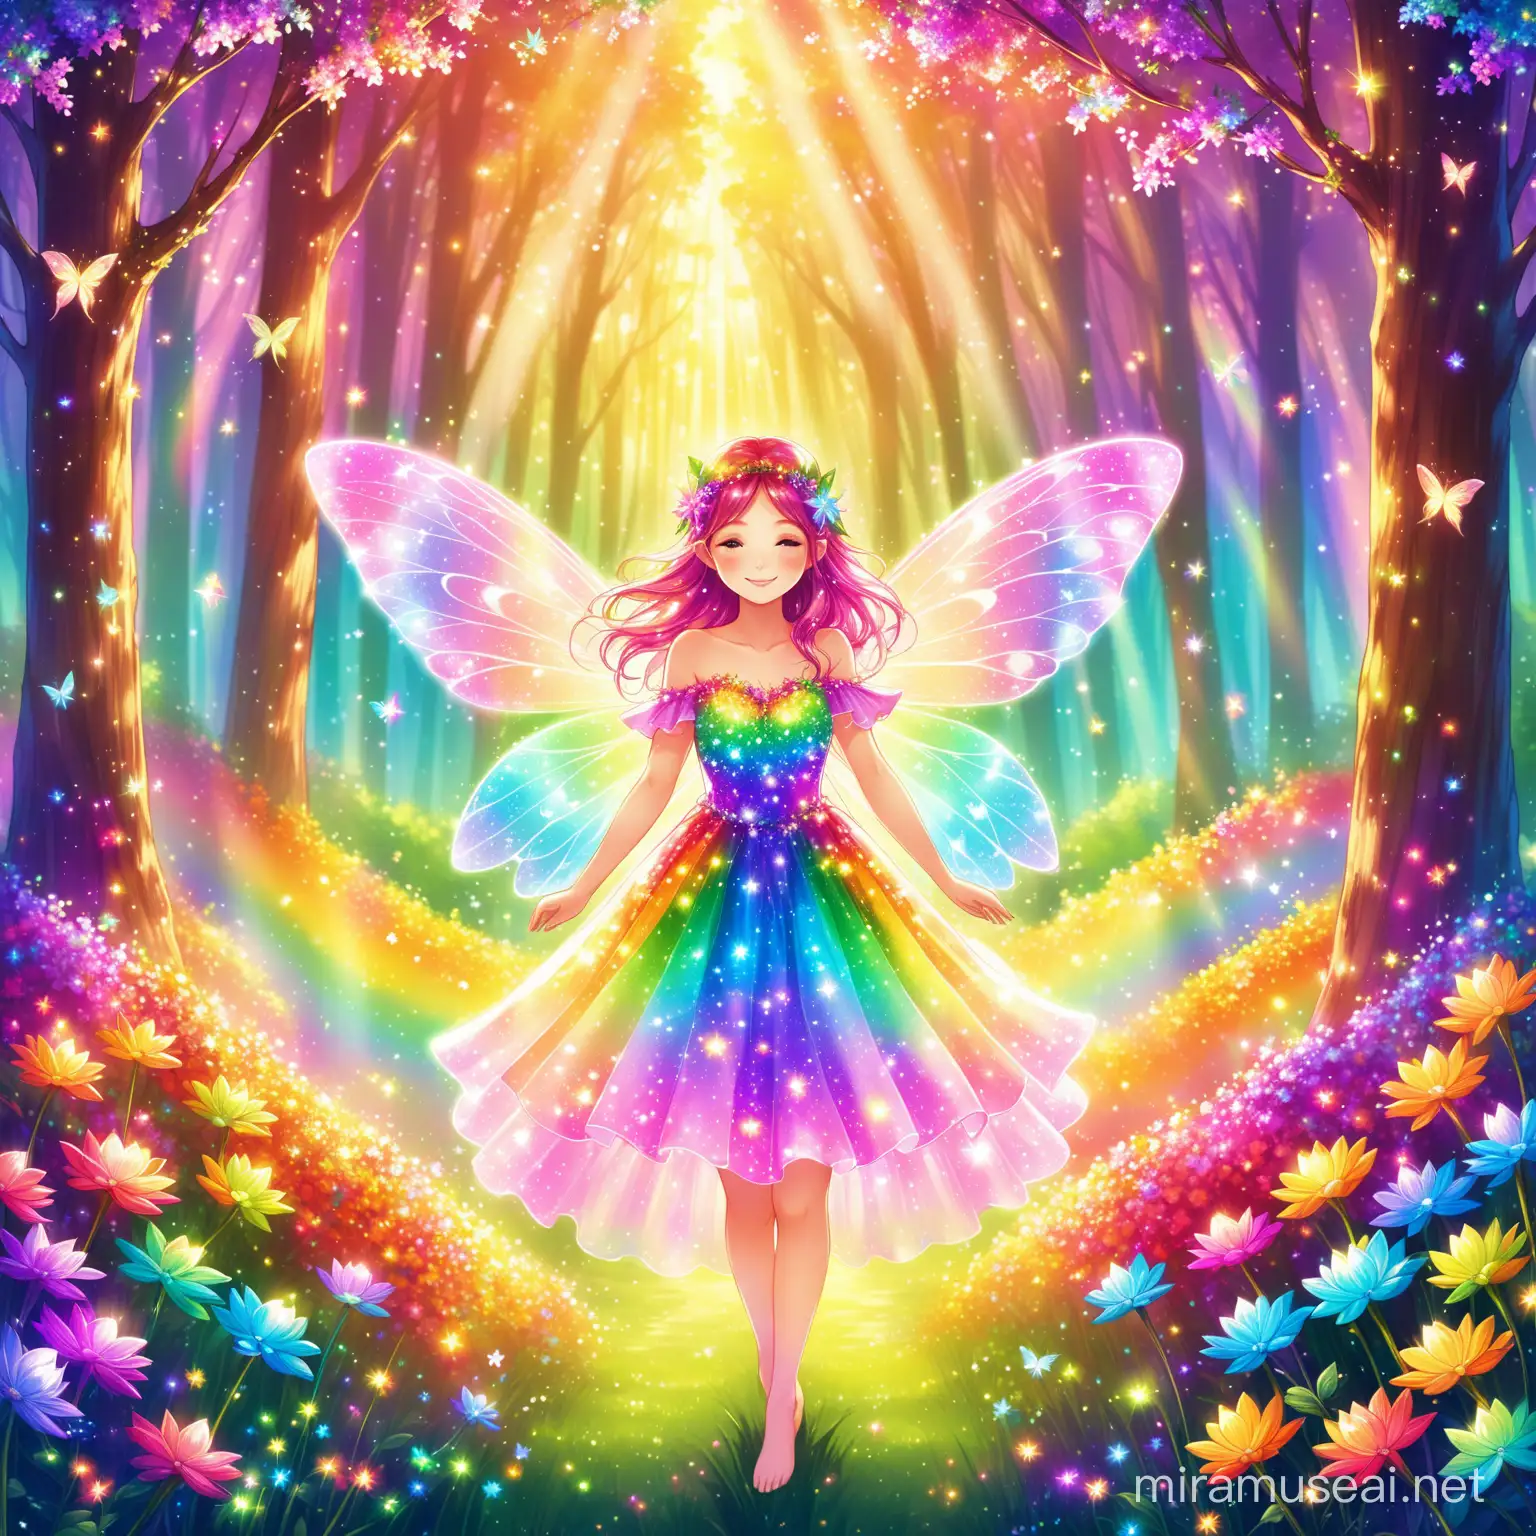 Enchanting Rainbow Fairy Surrounded by Sparkling Flowers in a Magical Forest